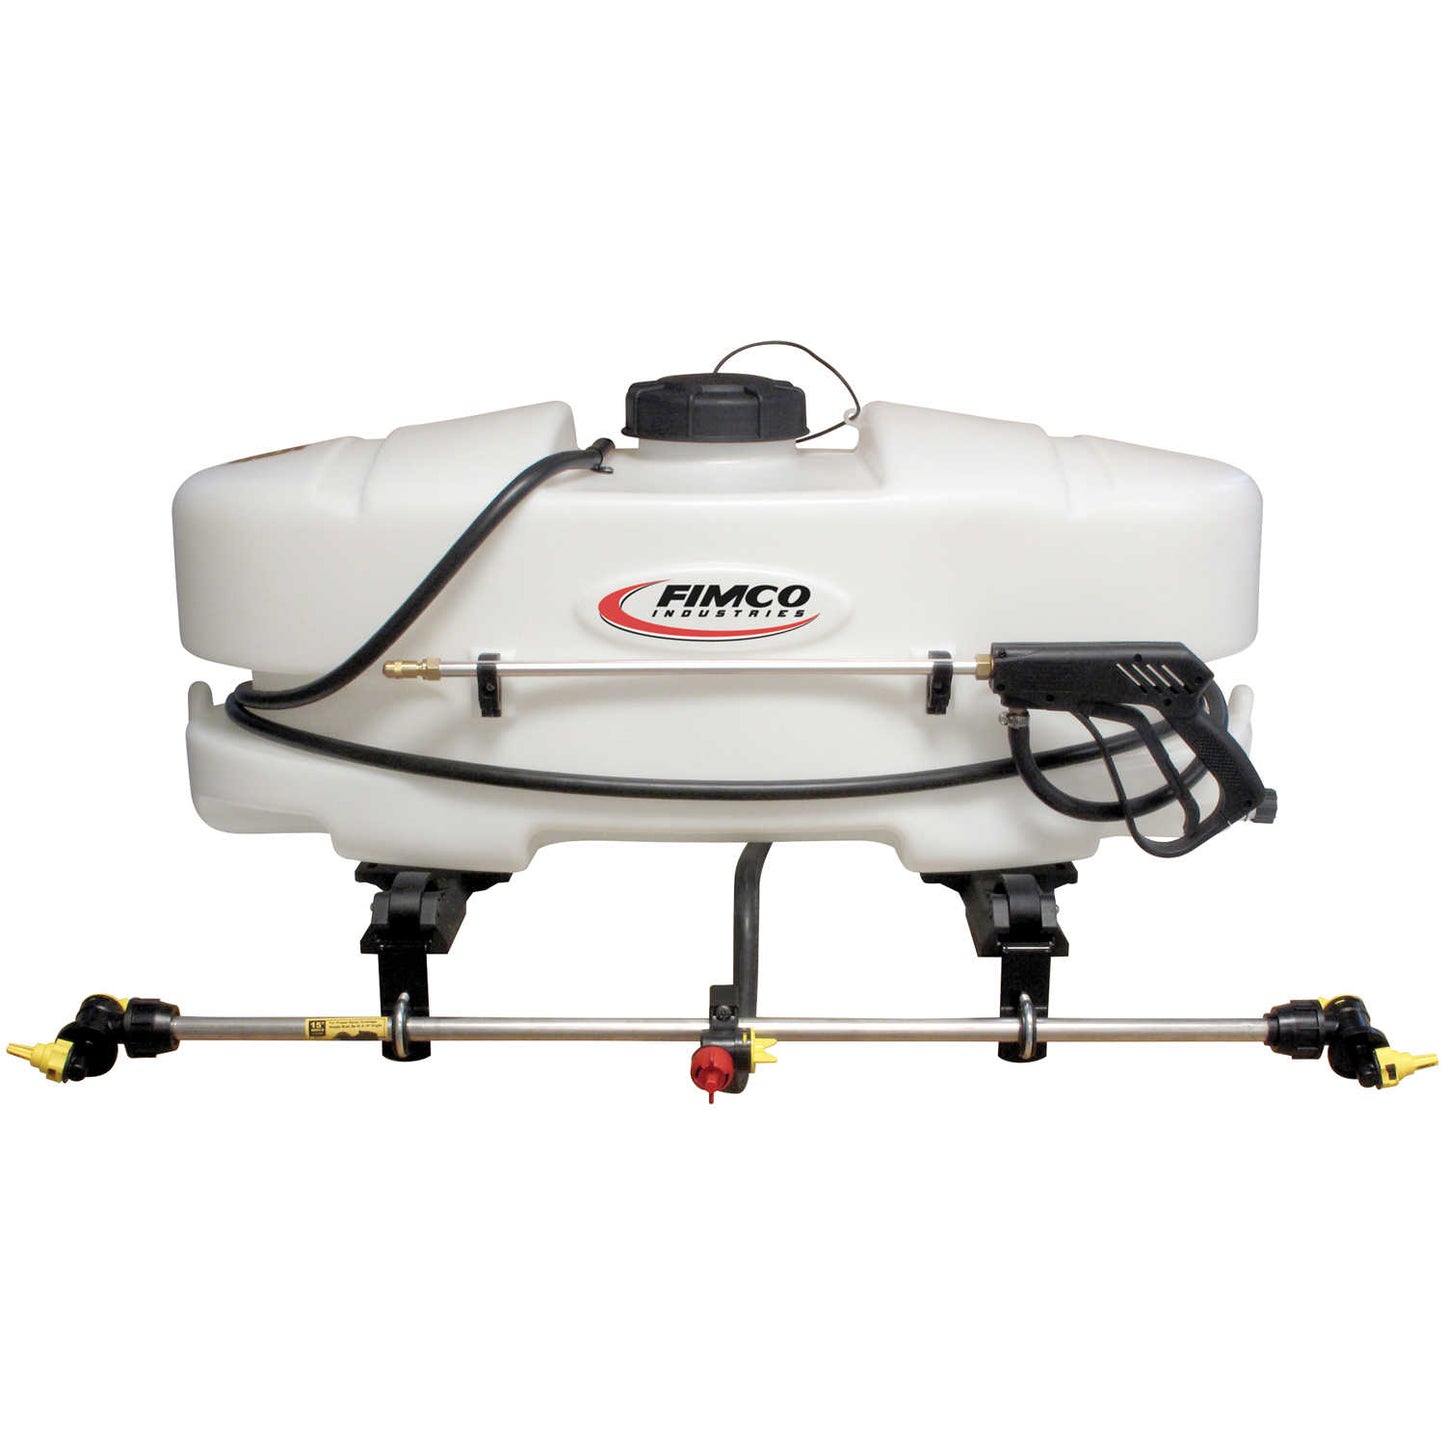 Fimco 25-Gallon ATV Sprayer with Stainless Steel 3-Nozzle Broadcast Boom